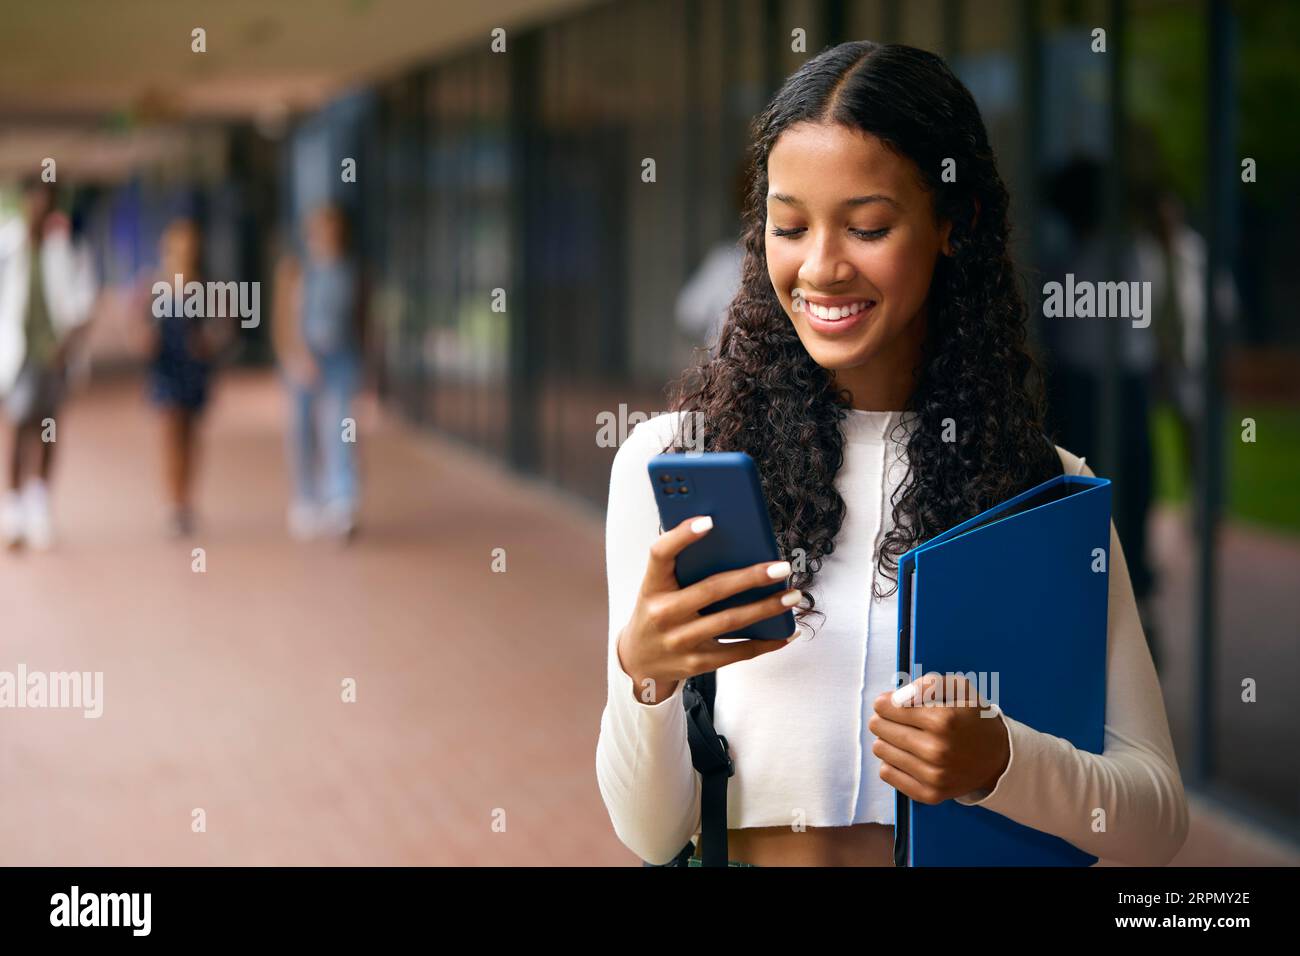 Female Secondary Or High School Student Outdoors At School Going To Class Looking At Mobile Phone Stock Photo